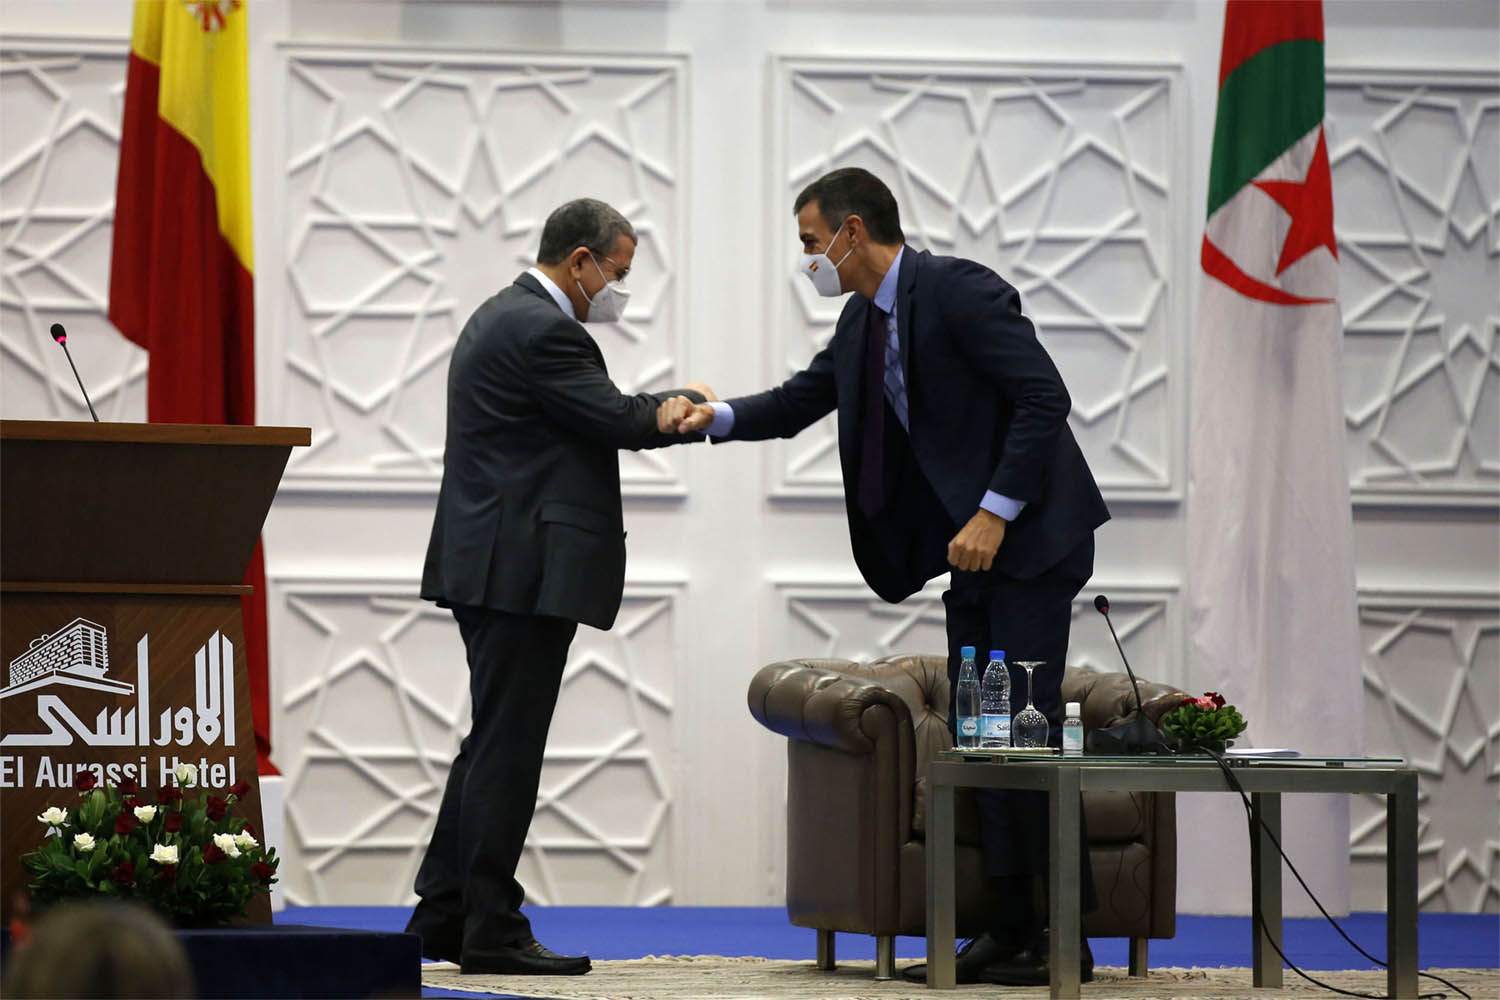 Algeria's two-decade-old friendship treaty with Spain suspended